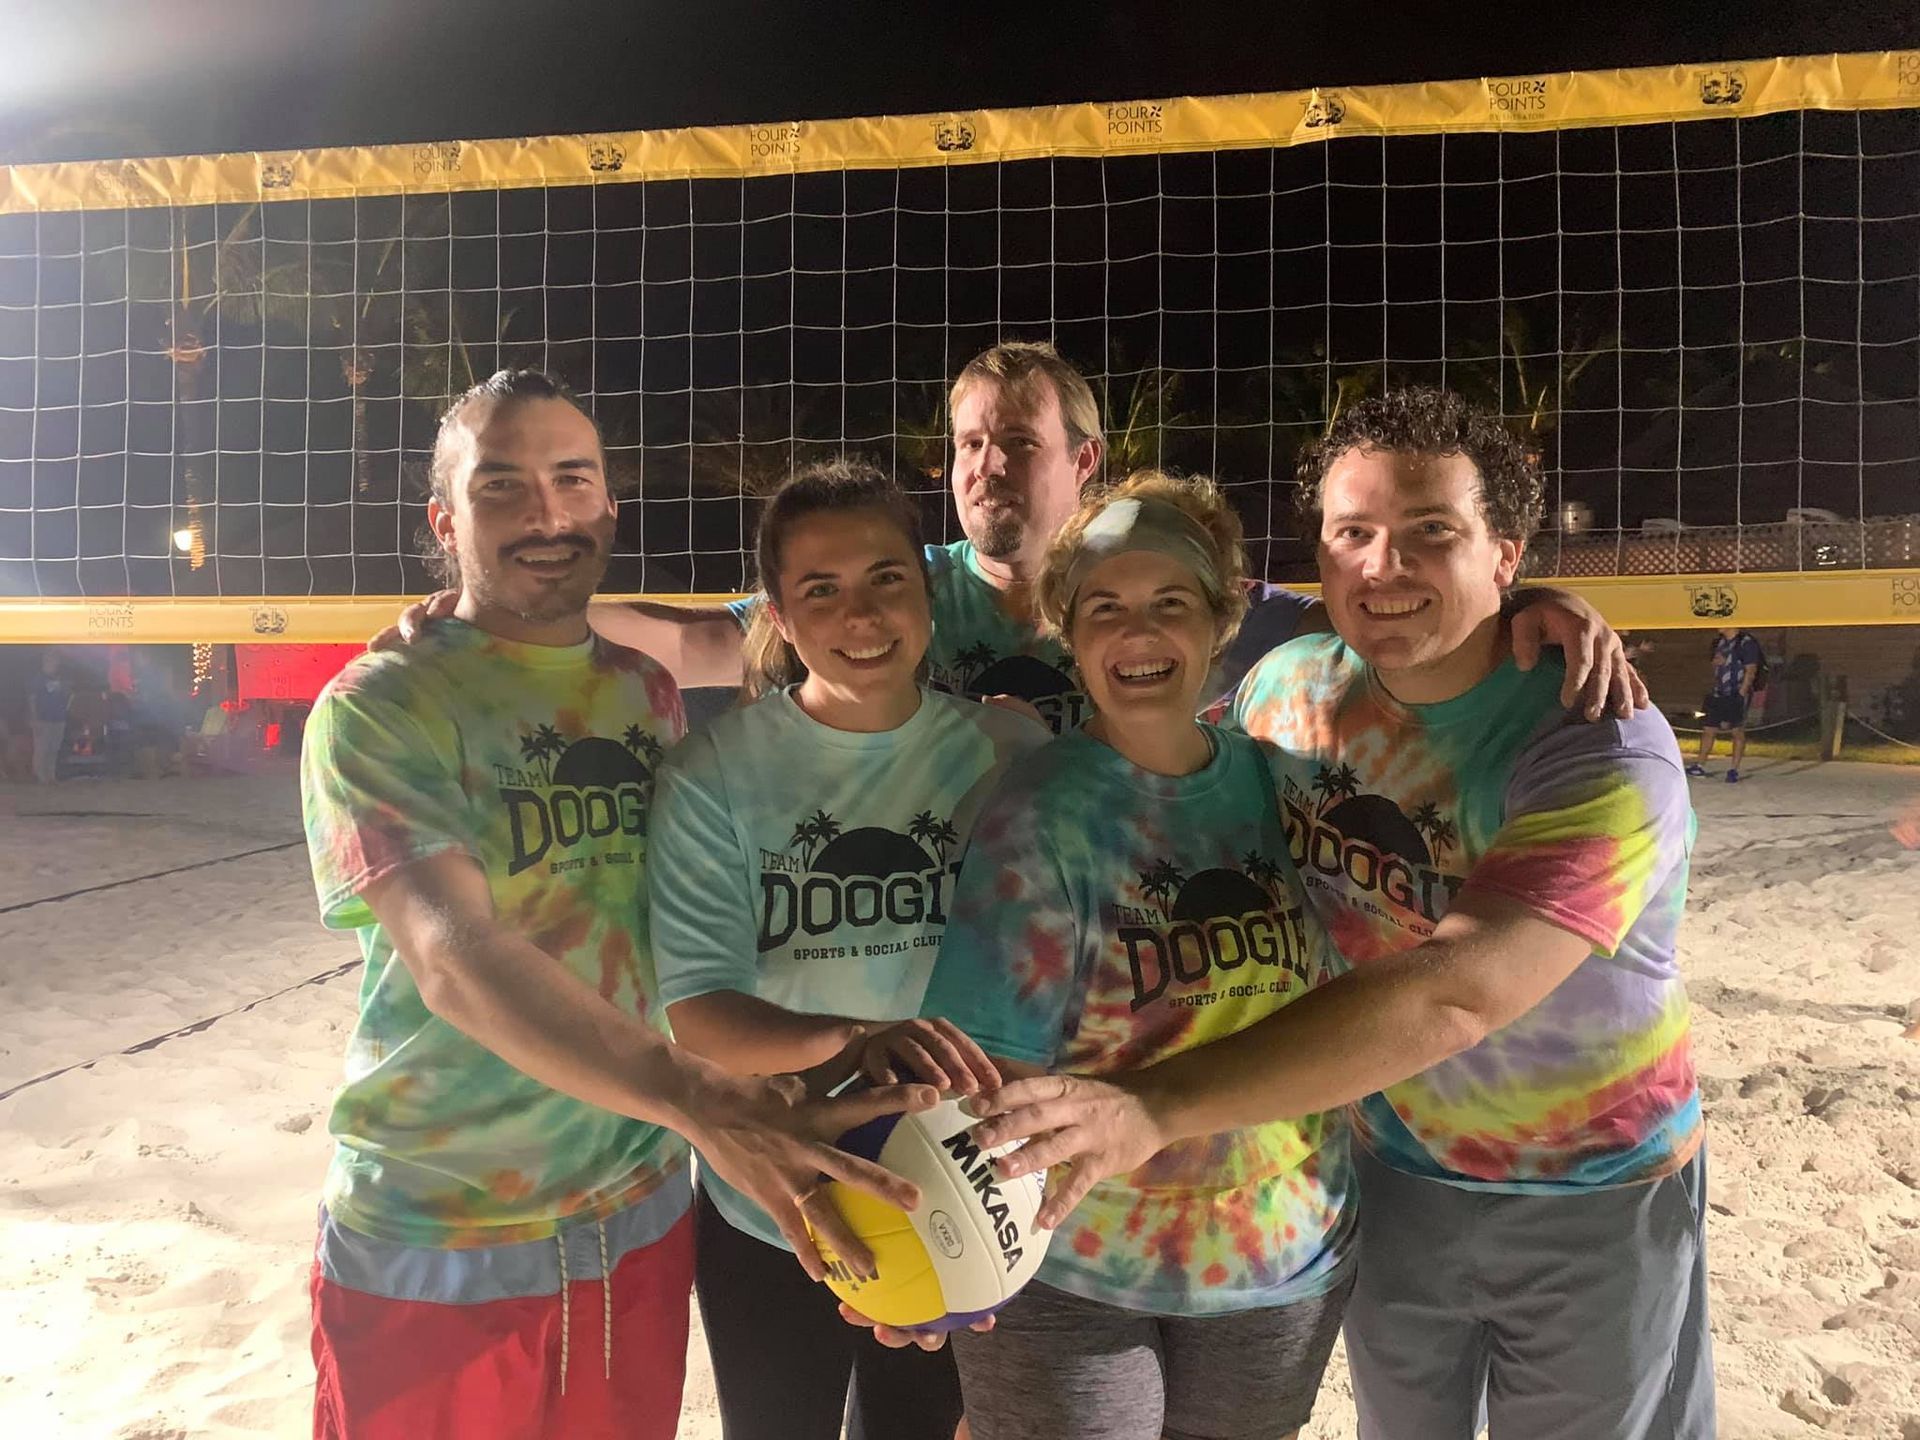 People in Colorful Tie Dye Shirts Holding a Volleyball Ball — North Port, FL — Team Doogie